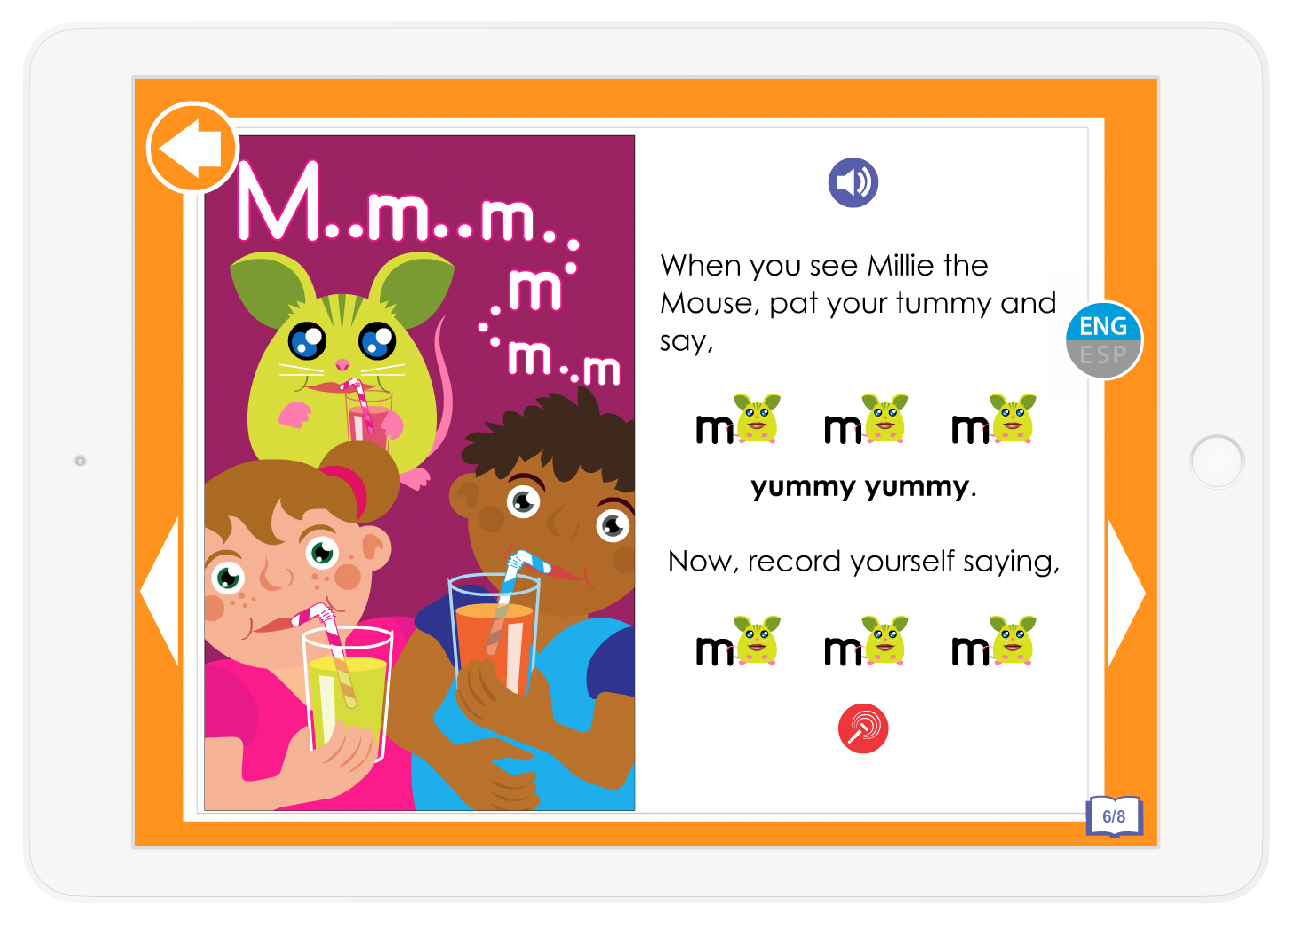 Learn each sound in English with the help of a memorable character whose story and song emphasize the phoneme. For example, Millie the Mouse loves to eat, and she says, “Mmmm.”